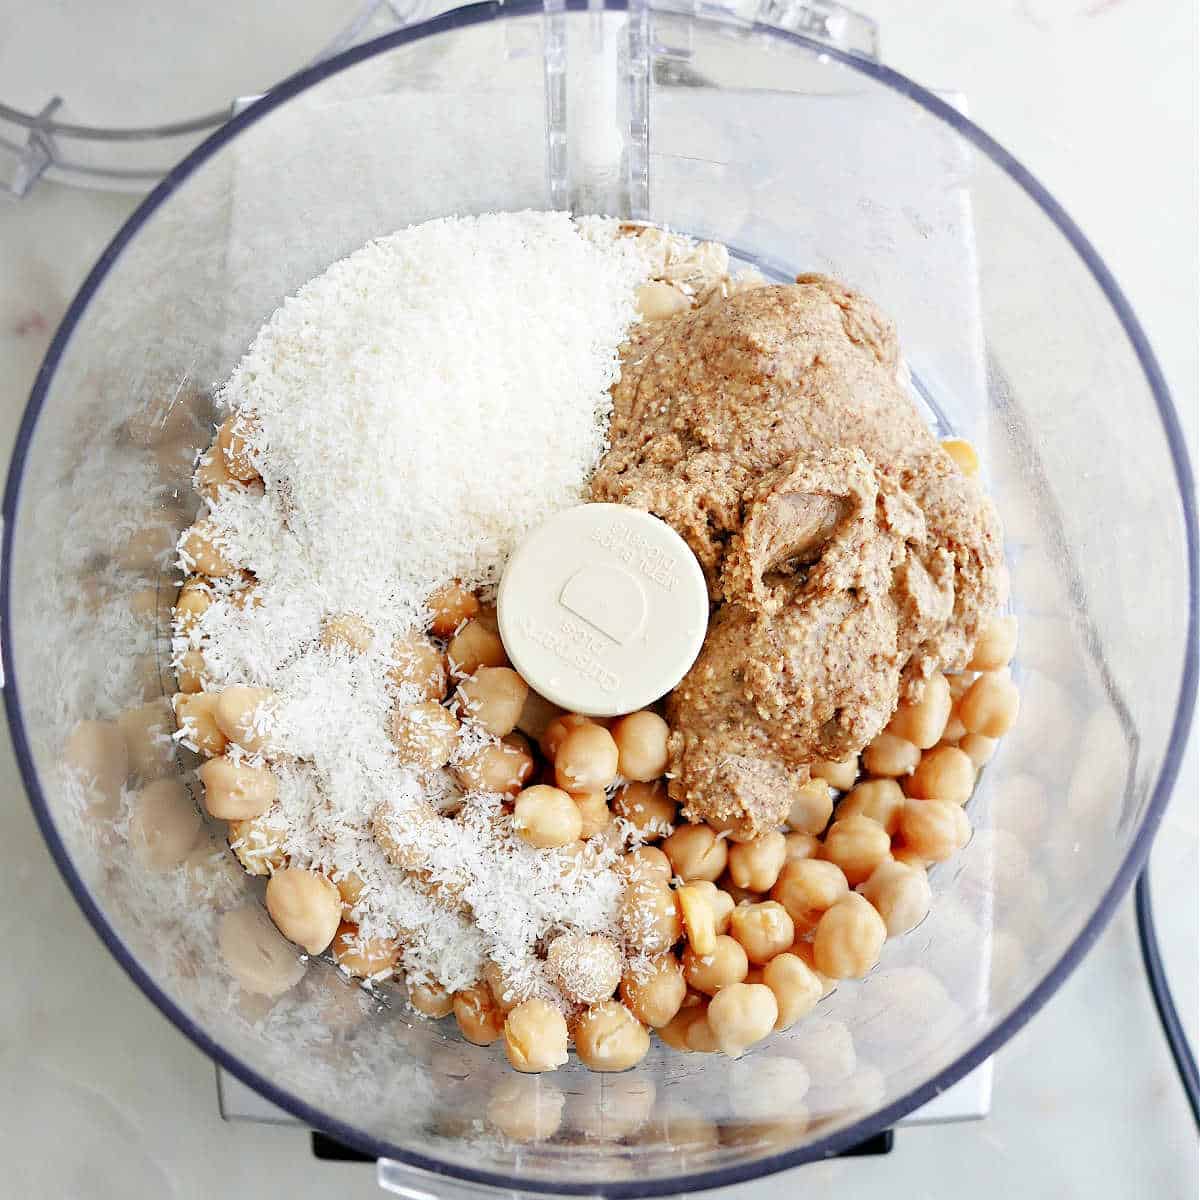 chickpeas, almond butter, coconut, oats, maple syrup, and vanilla in a food processor